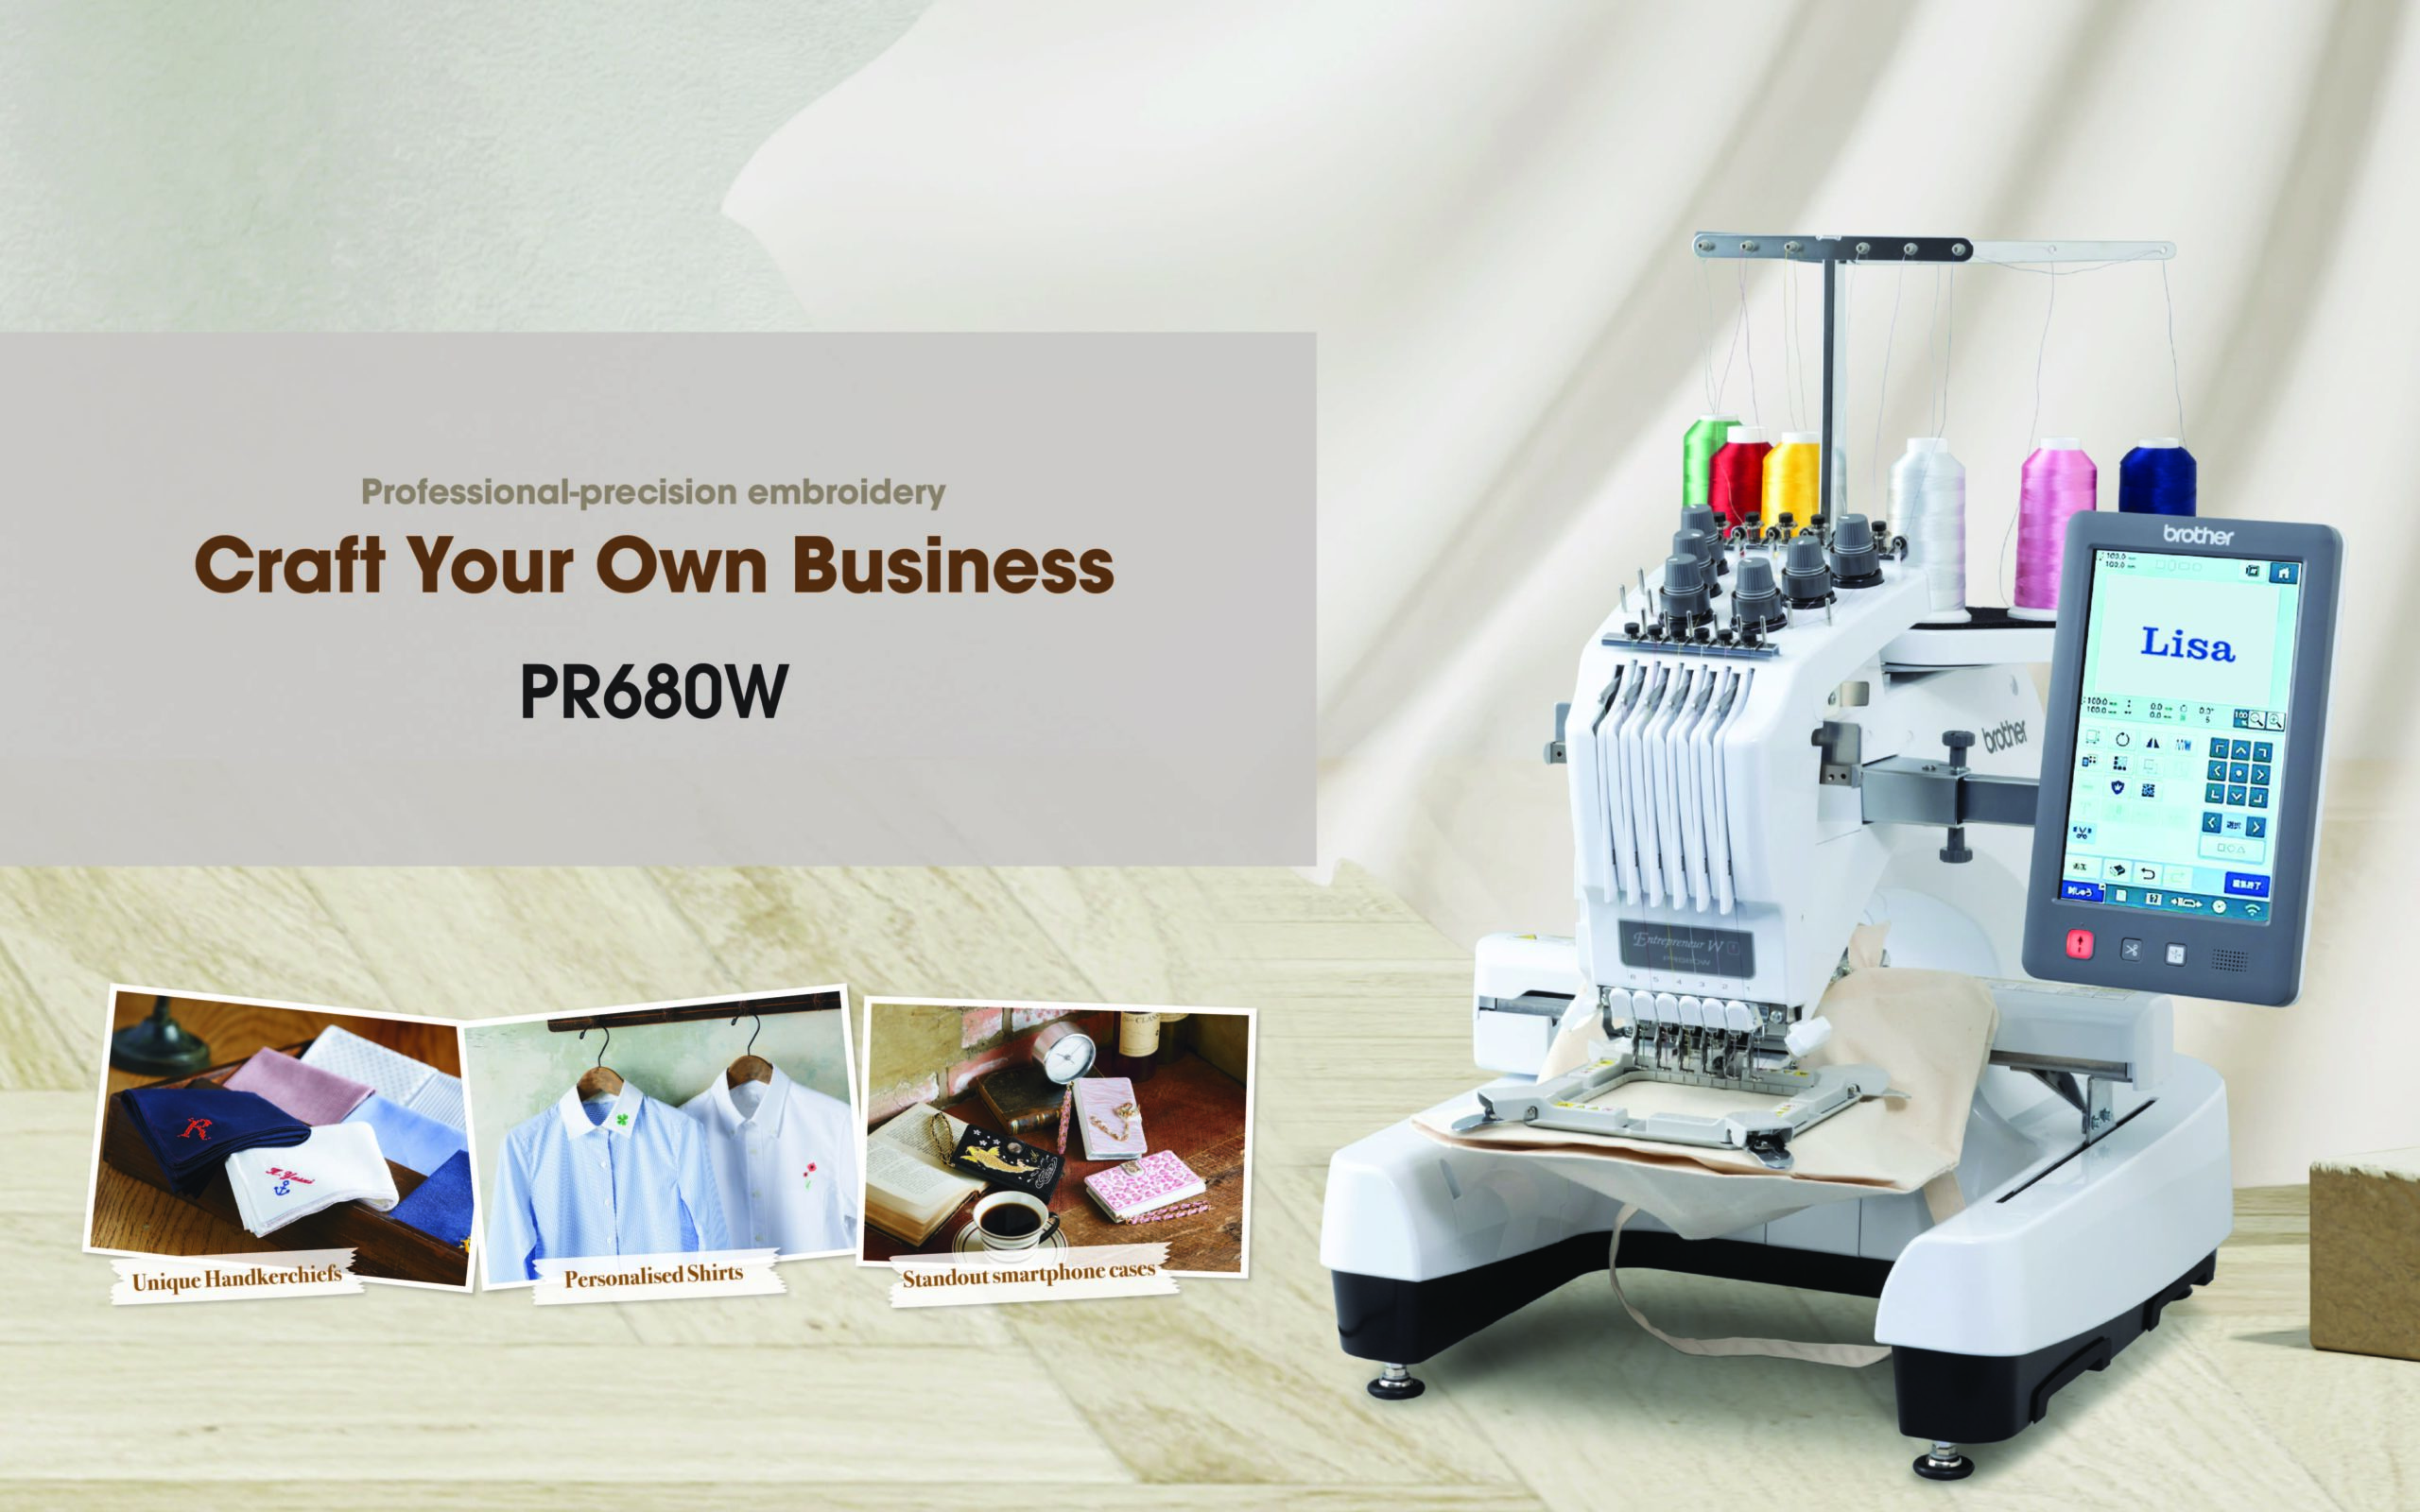 Entrepreneurs, meet the innovative 6-needle embroidery machine that truly means business.